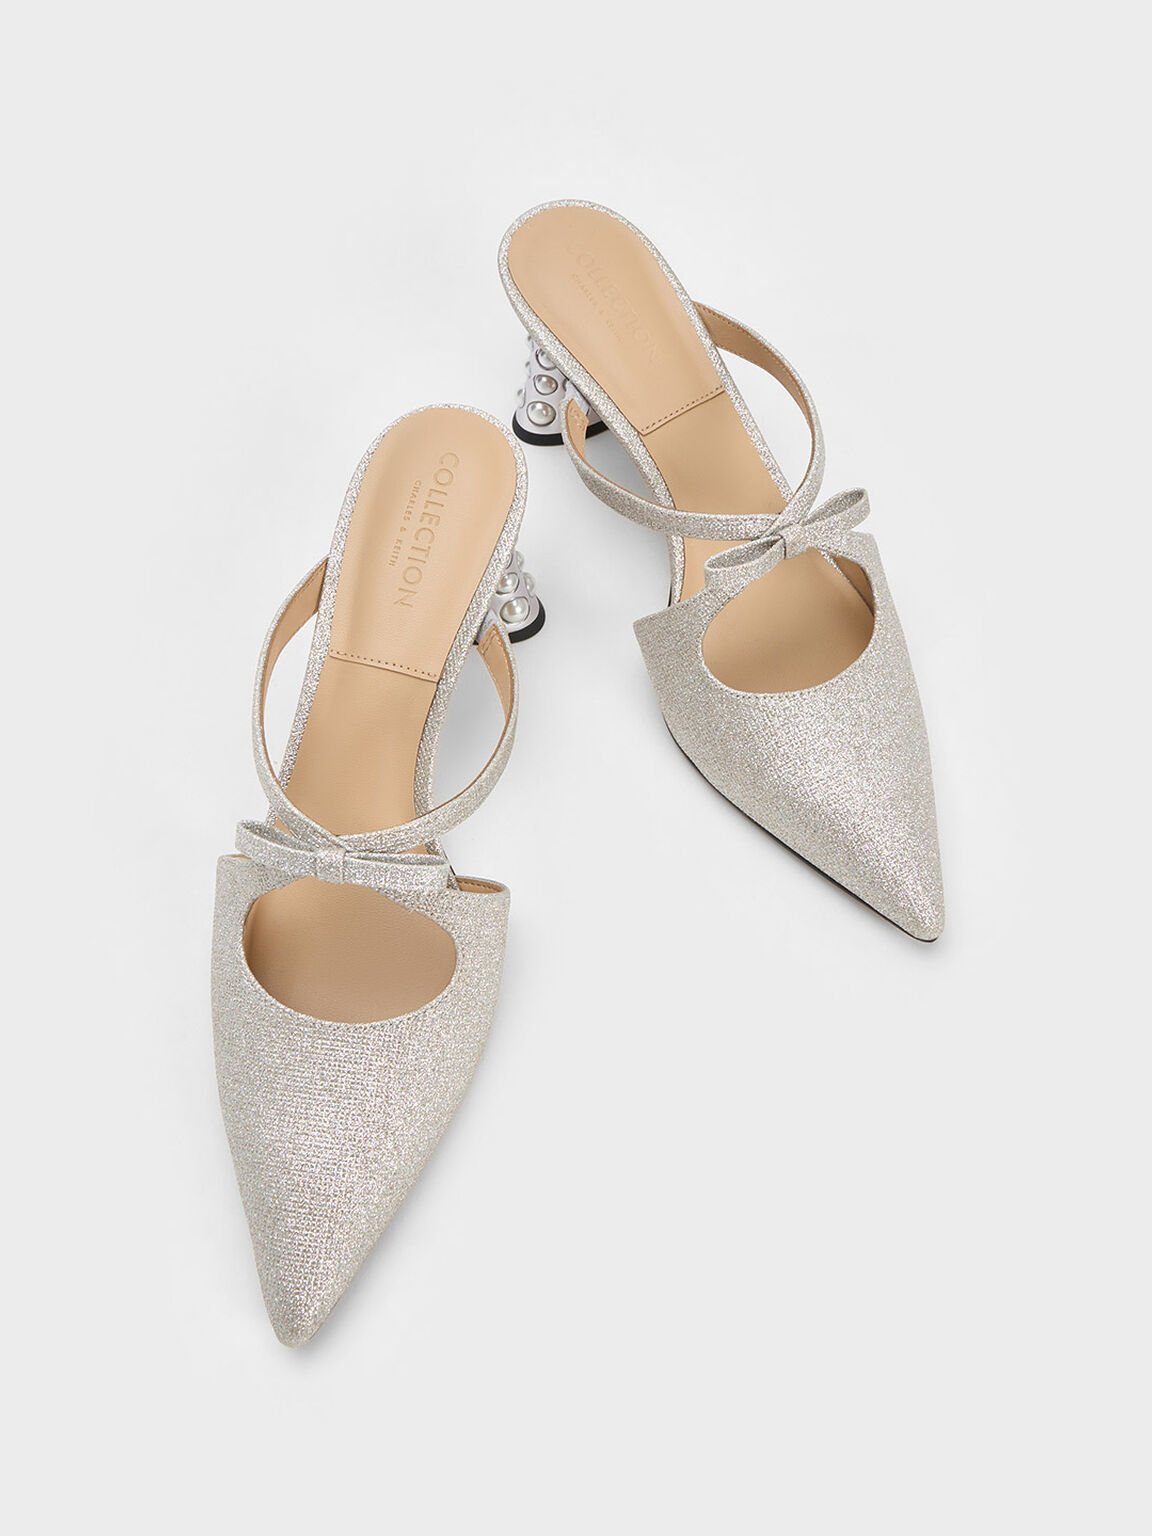 Beaded Heel Glittered Bow Mules, Silver, hi-res